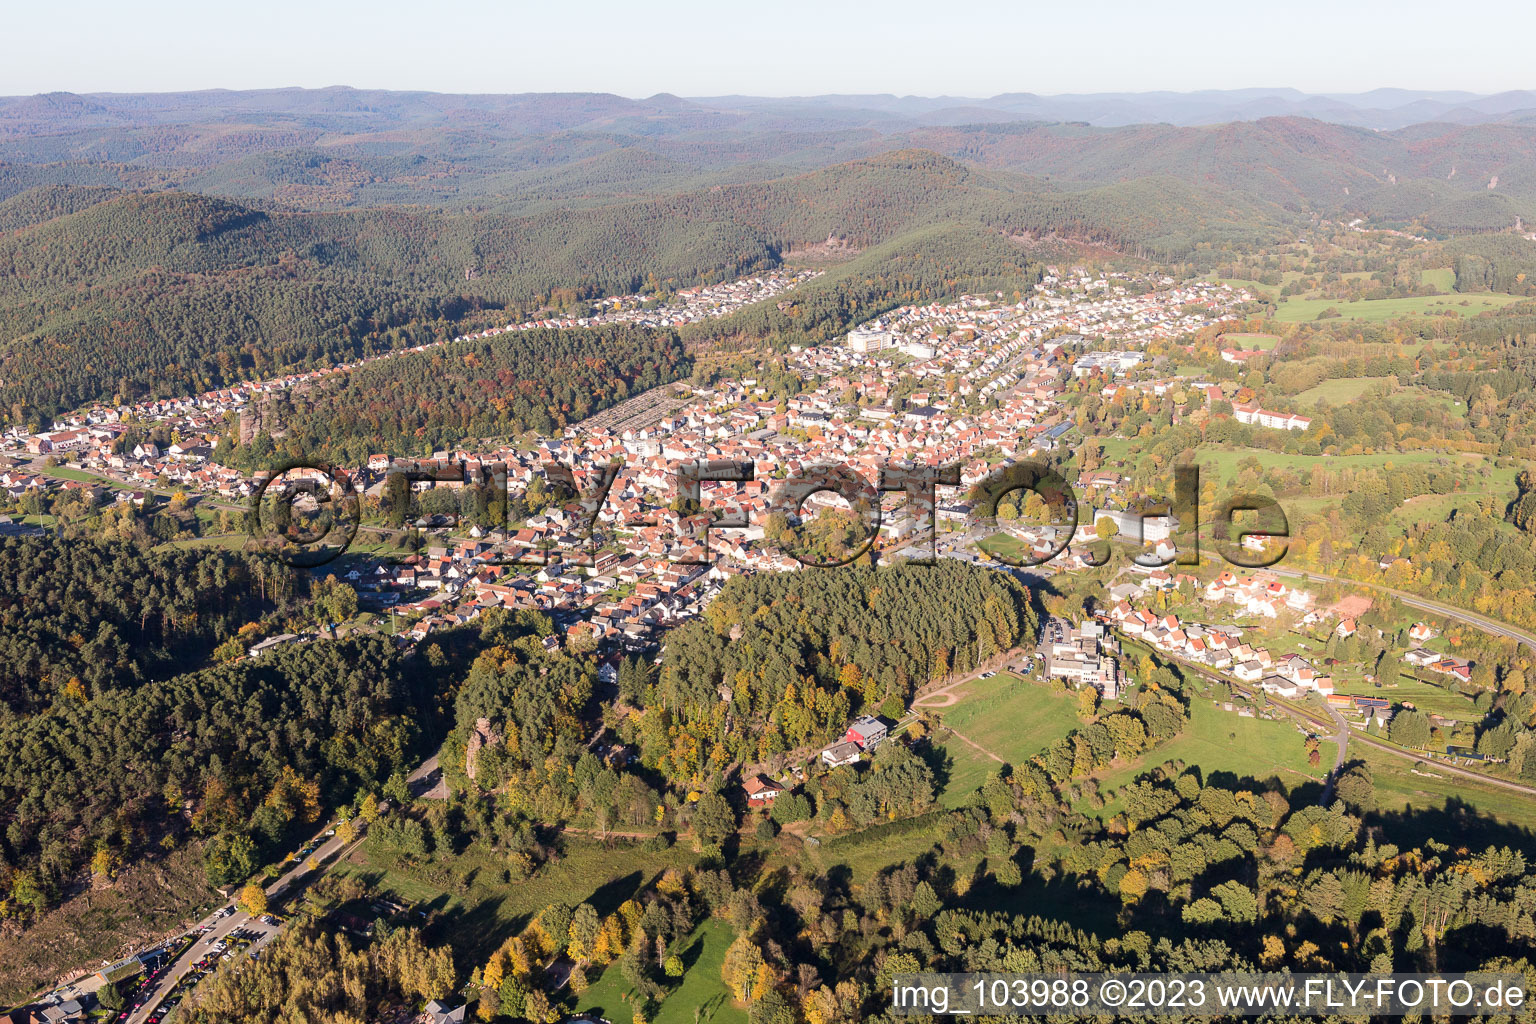 Dahn in the state Rhineland-Palatinate, Germany from above